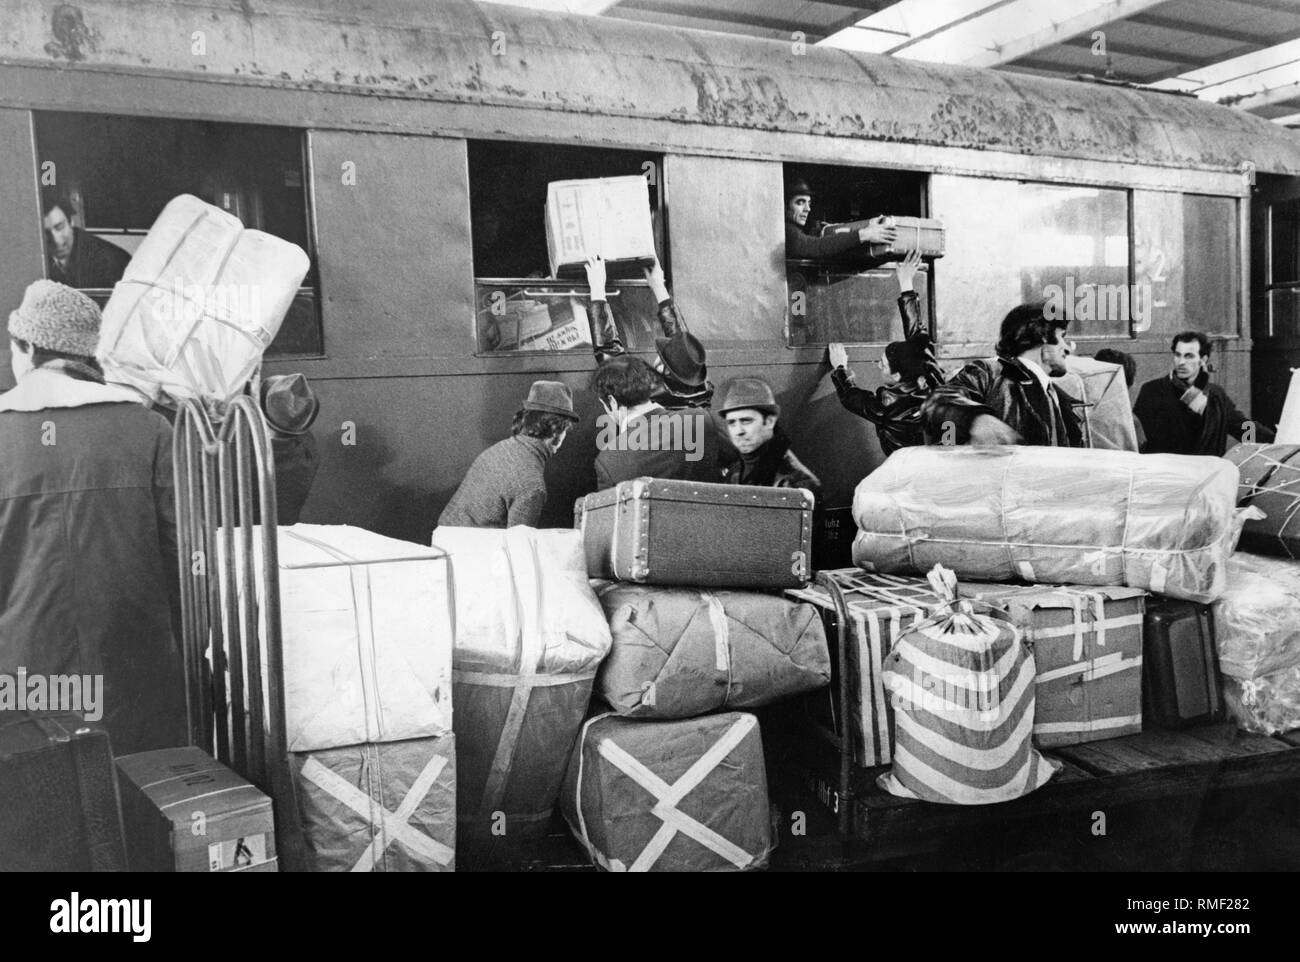 Numerous gastarbeiters in the Federal Republic of Germany are returning home for Christmas in 1974, either for a temporary visit to their families or for lack of work for the next year. Stock Photo